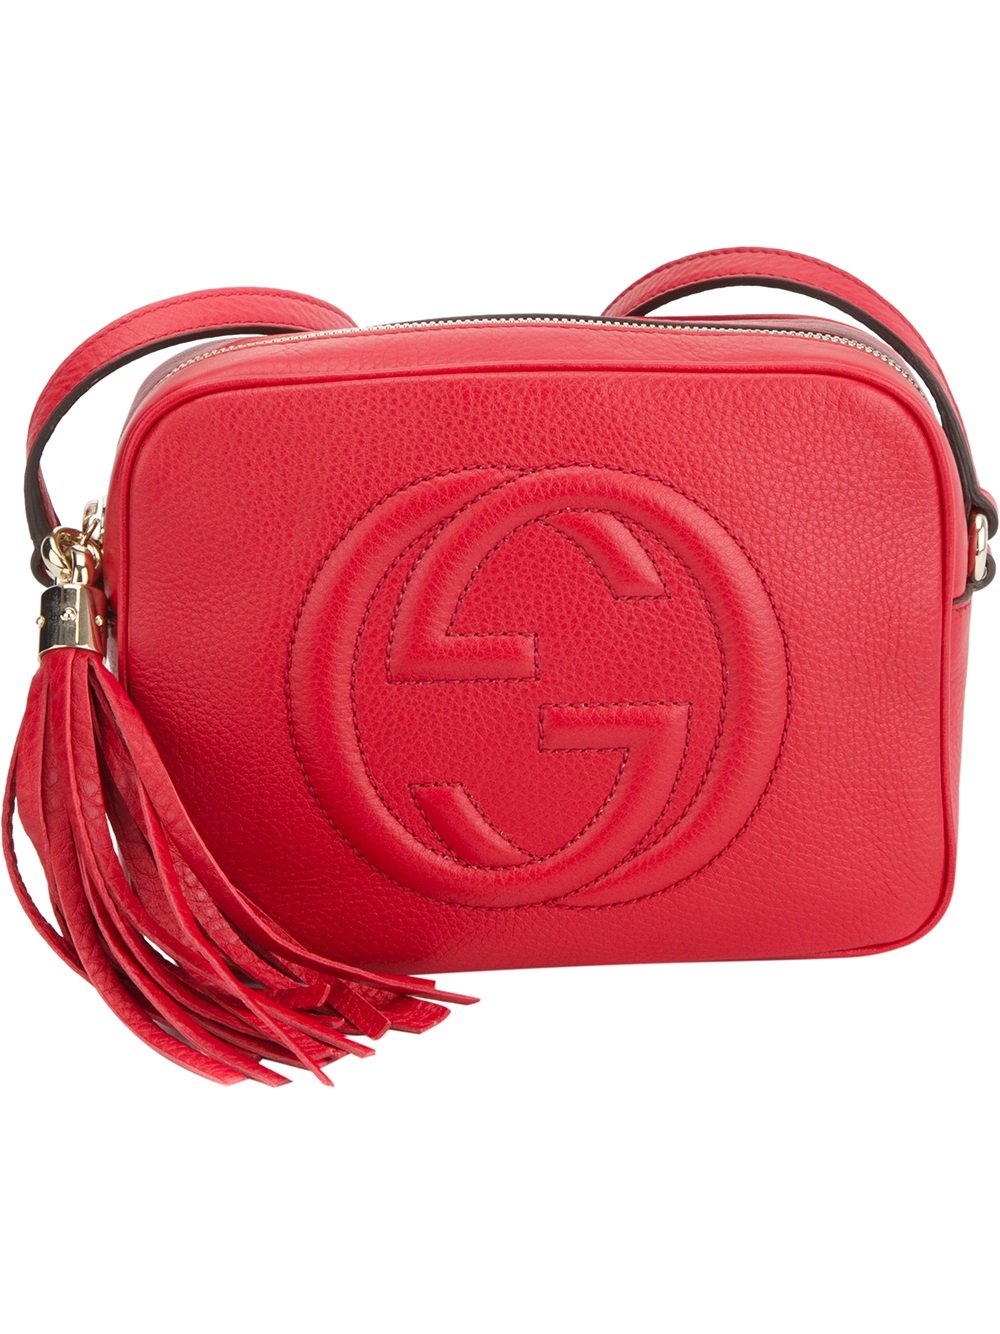 Gucci Marmont matelasse small red leather bag | Vintage-United